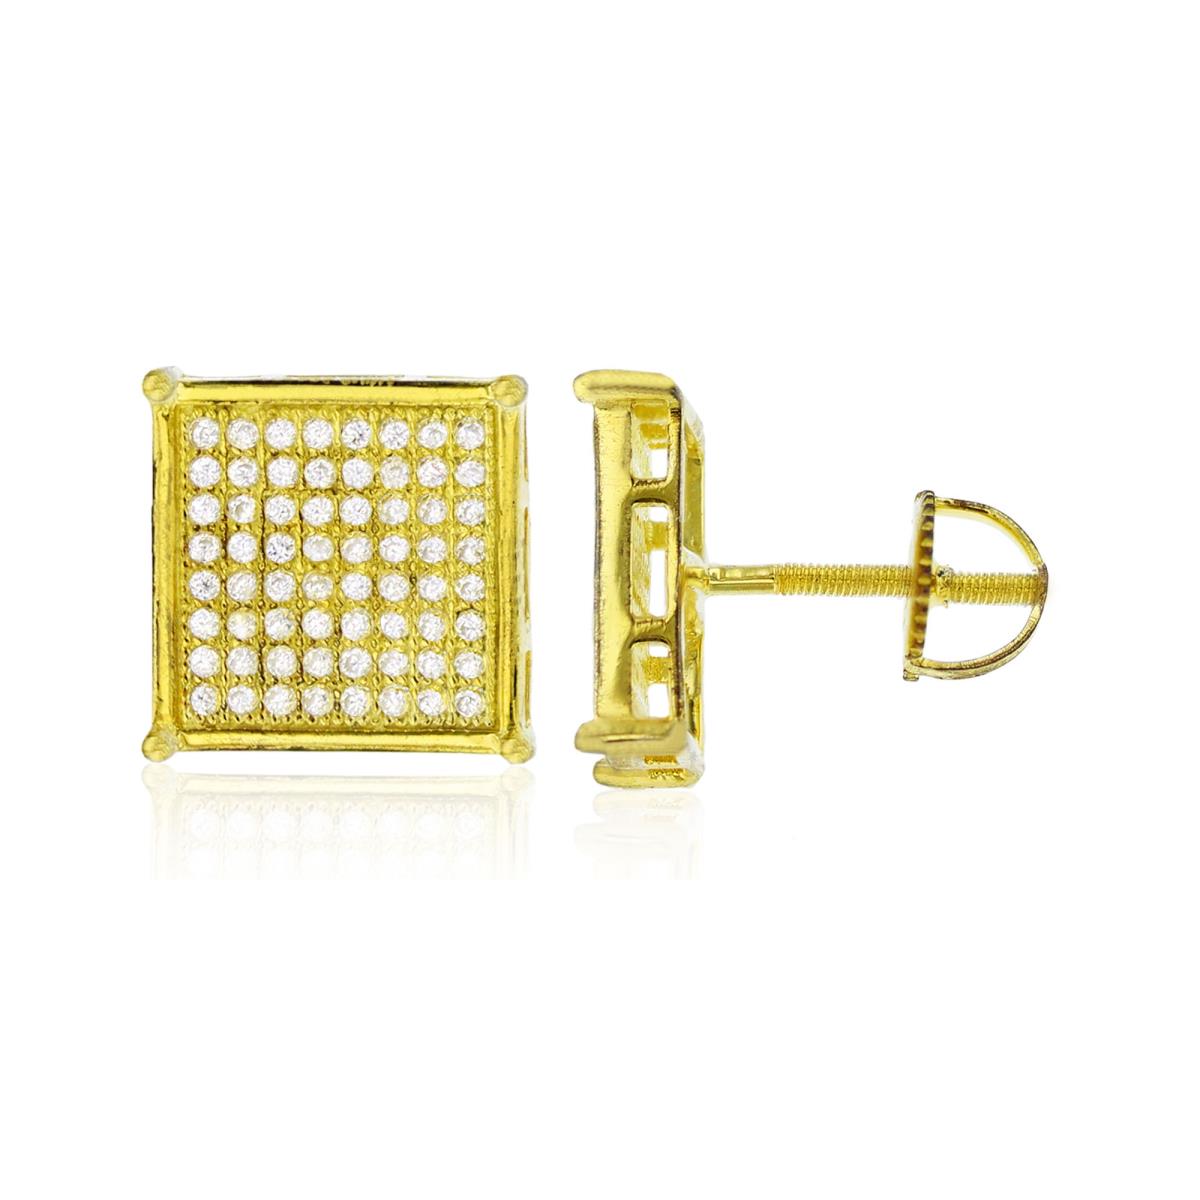 Sterling Silver Yellow Micropave Square 12.30x12.30mm Screw-Back Stud Earring